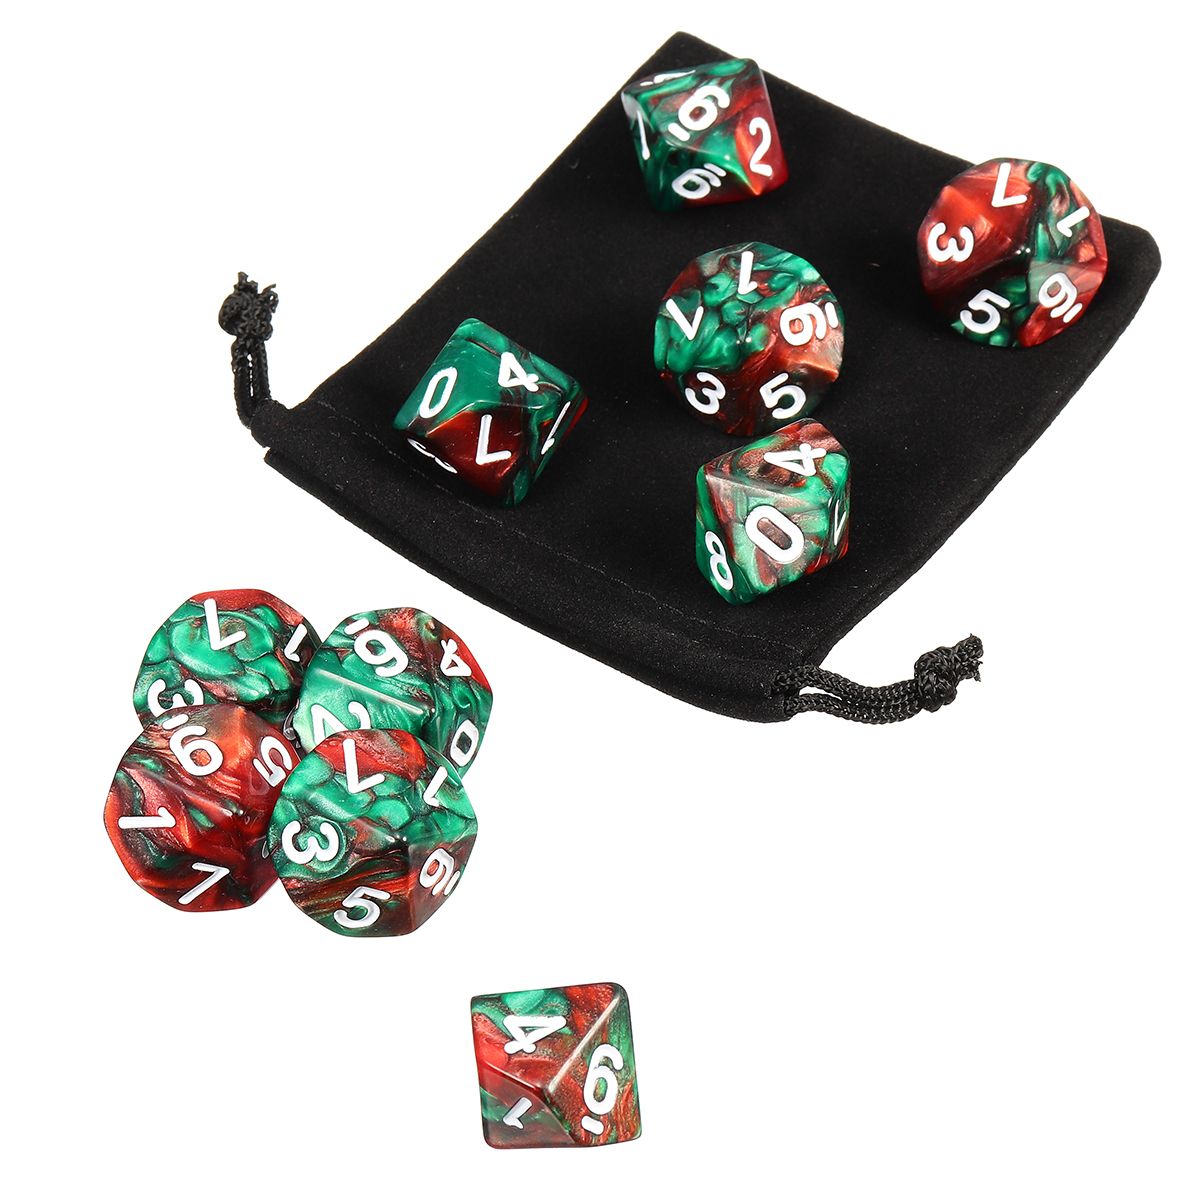 10pcs-10-Sided-Dice-D10-Polyhedral-Dice-RPG-Role-Playing-Game-Dices-w-bag-1351752